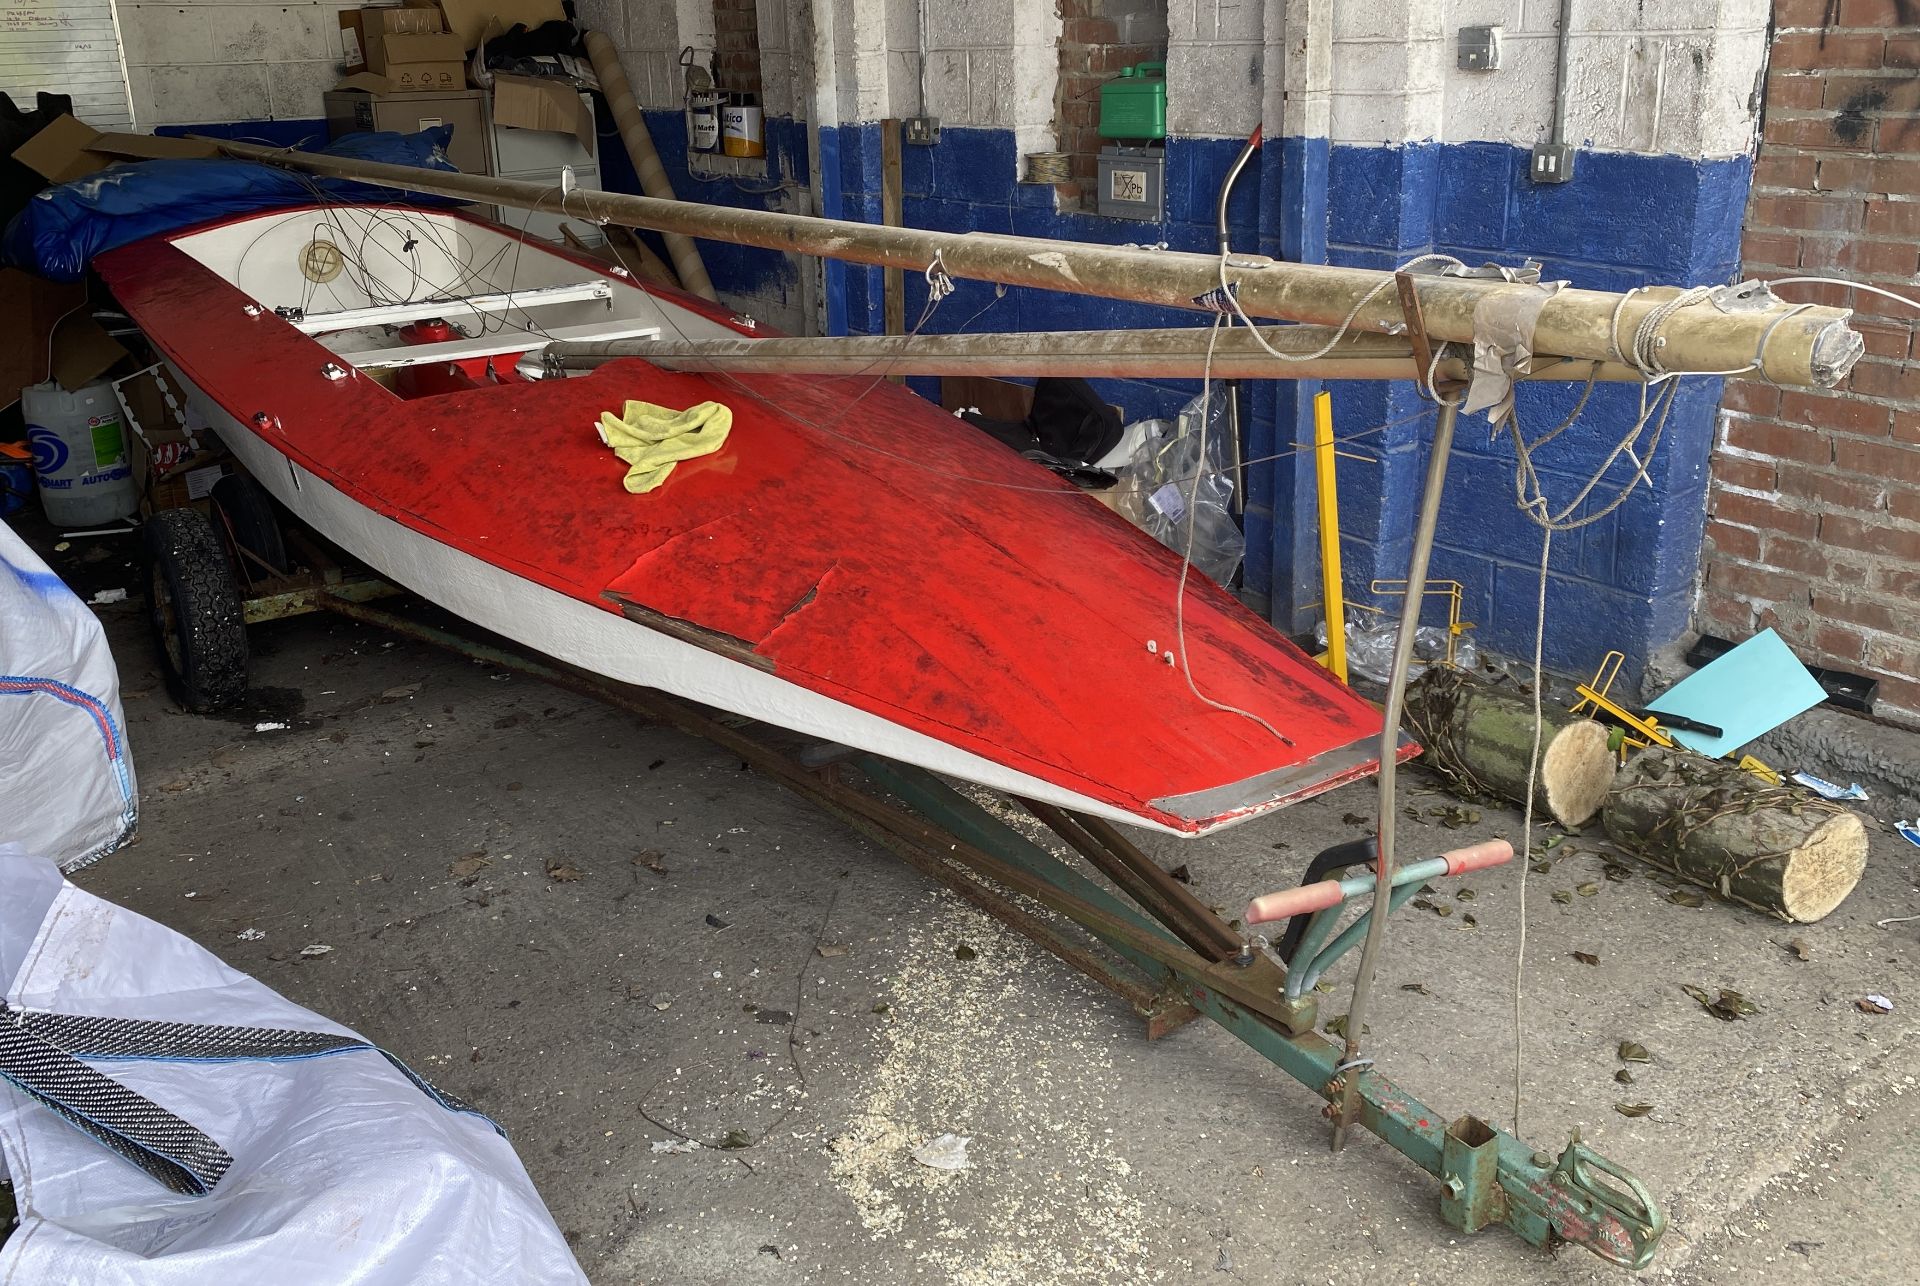 Red and white Fireball sailing boat with a 9' 9" (297cm) mast. - Image 19 of 24